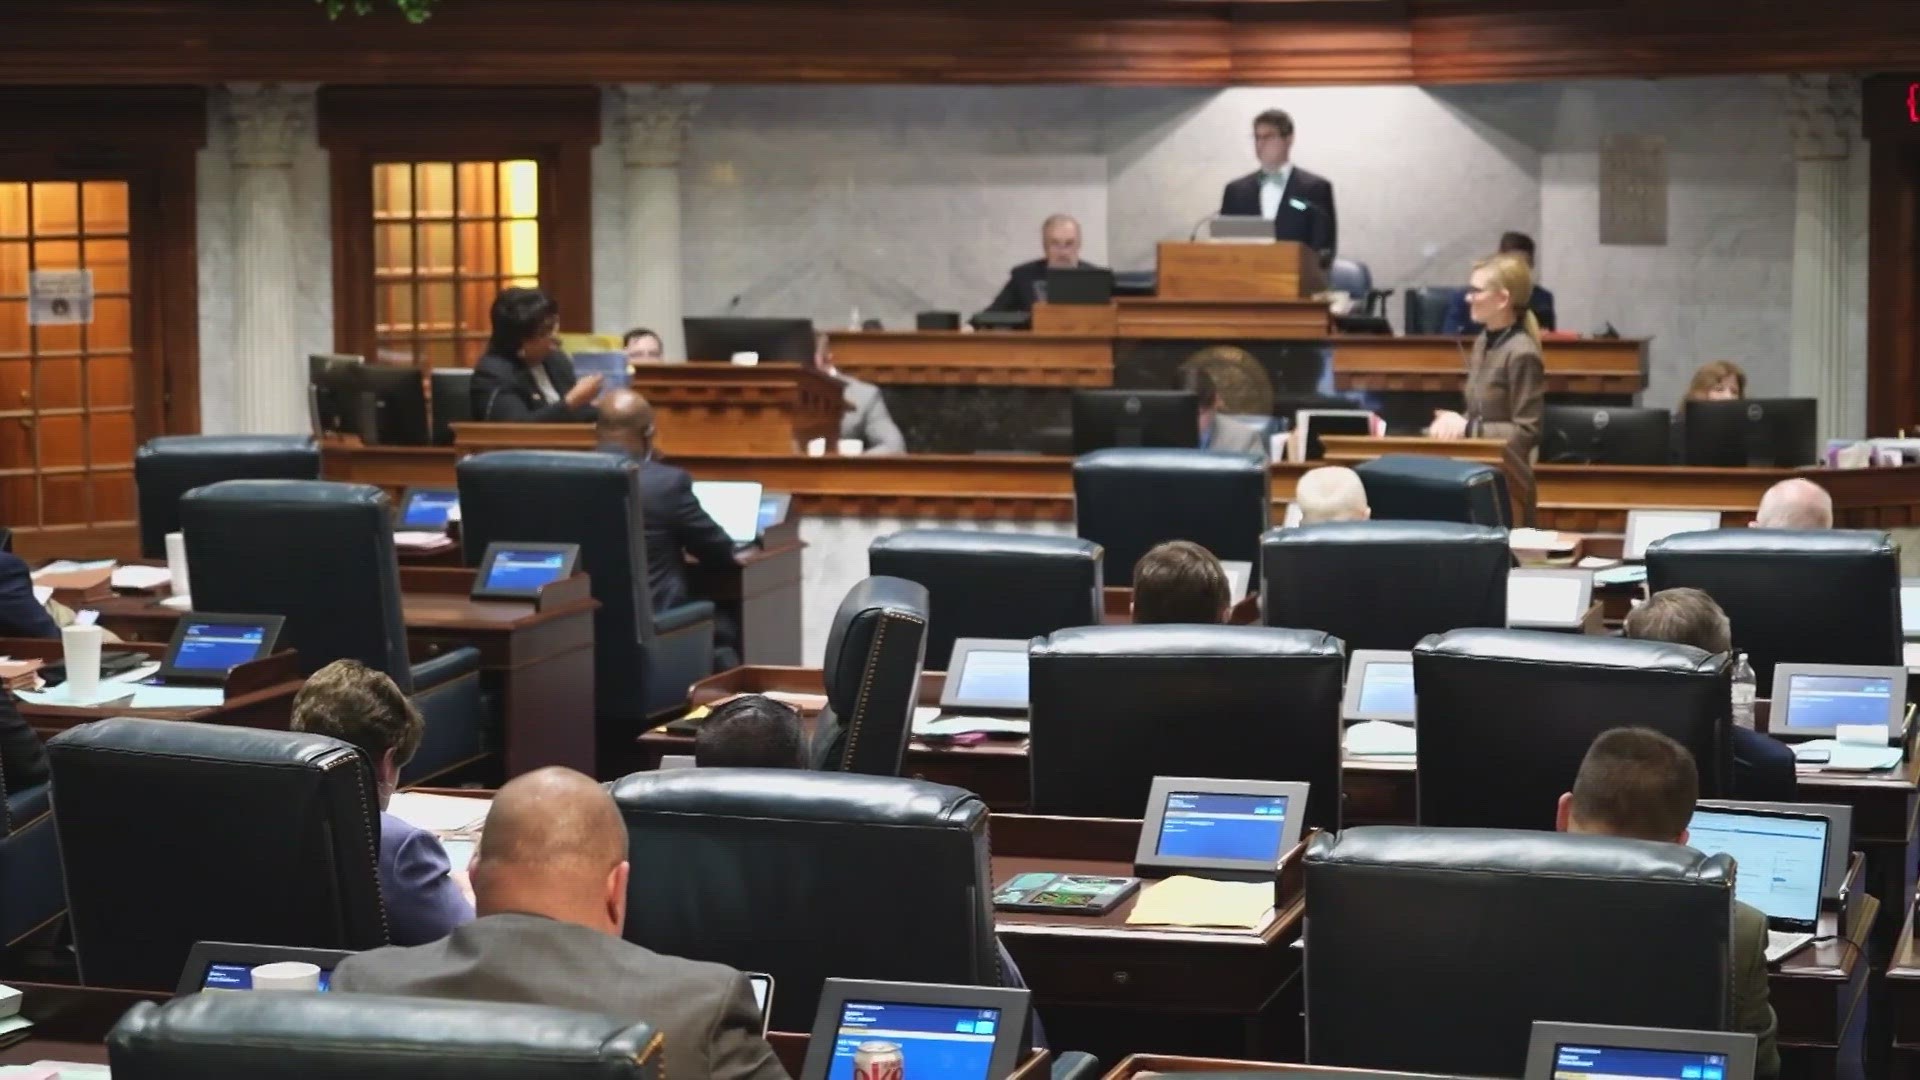 House Bill 1608 prohibits teaching human sexuality in Pre-K through third grade, something that doesn’t happen in Indiana until at least fifth grade.